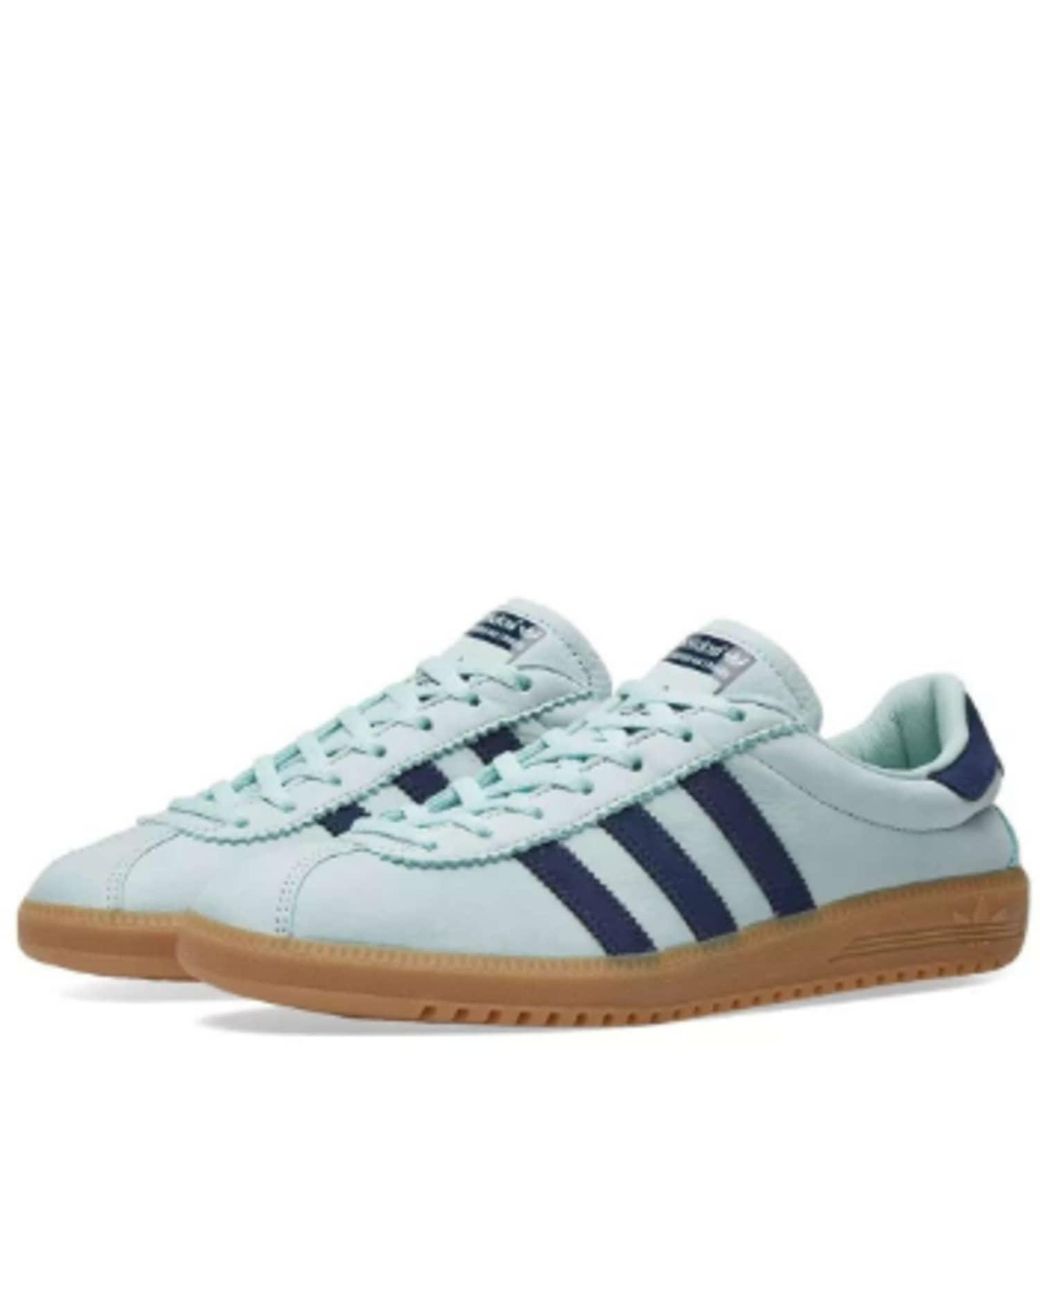 adidas Bermuda Sneakers In Green Cq2783 for Men - Save 70% - Lyst